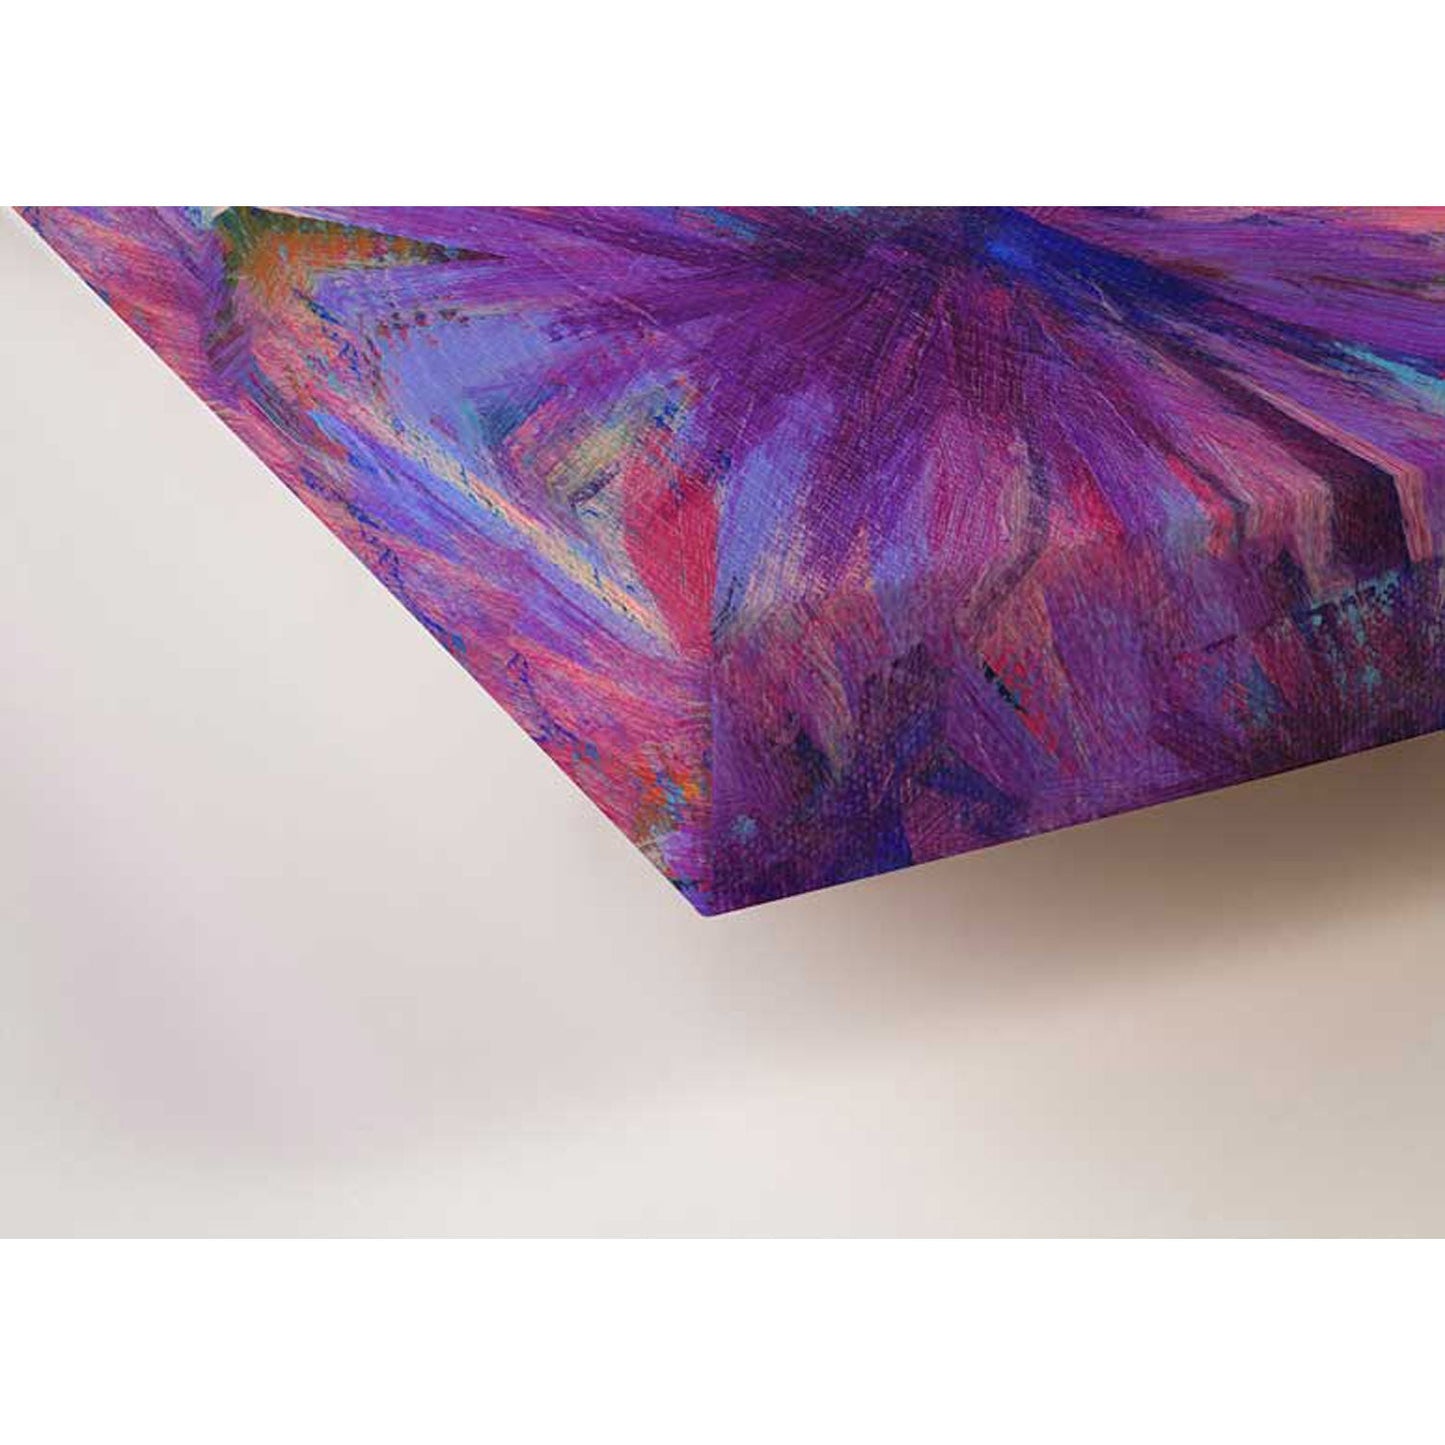 Water Series - Worlds Intertwined Canvas Wall Art